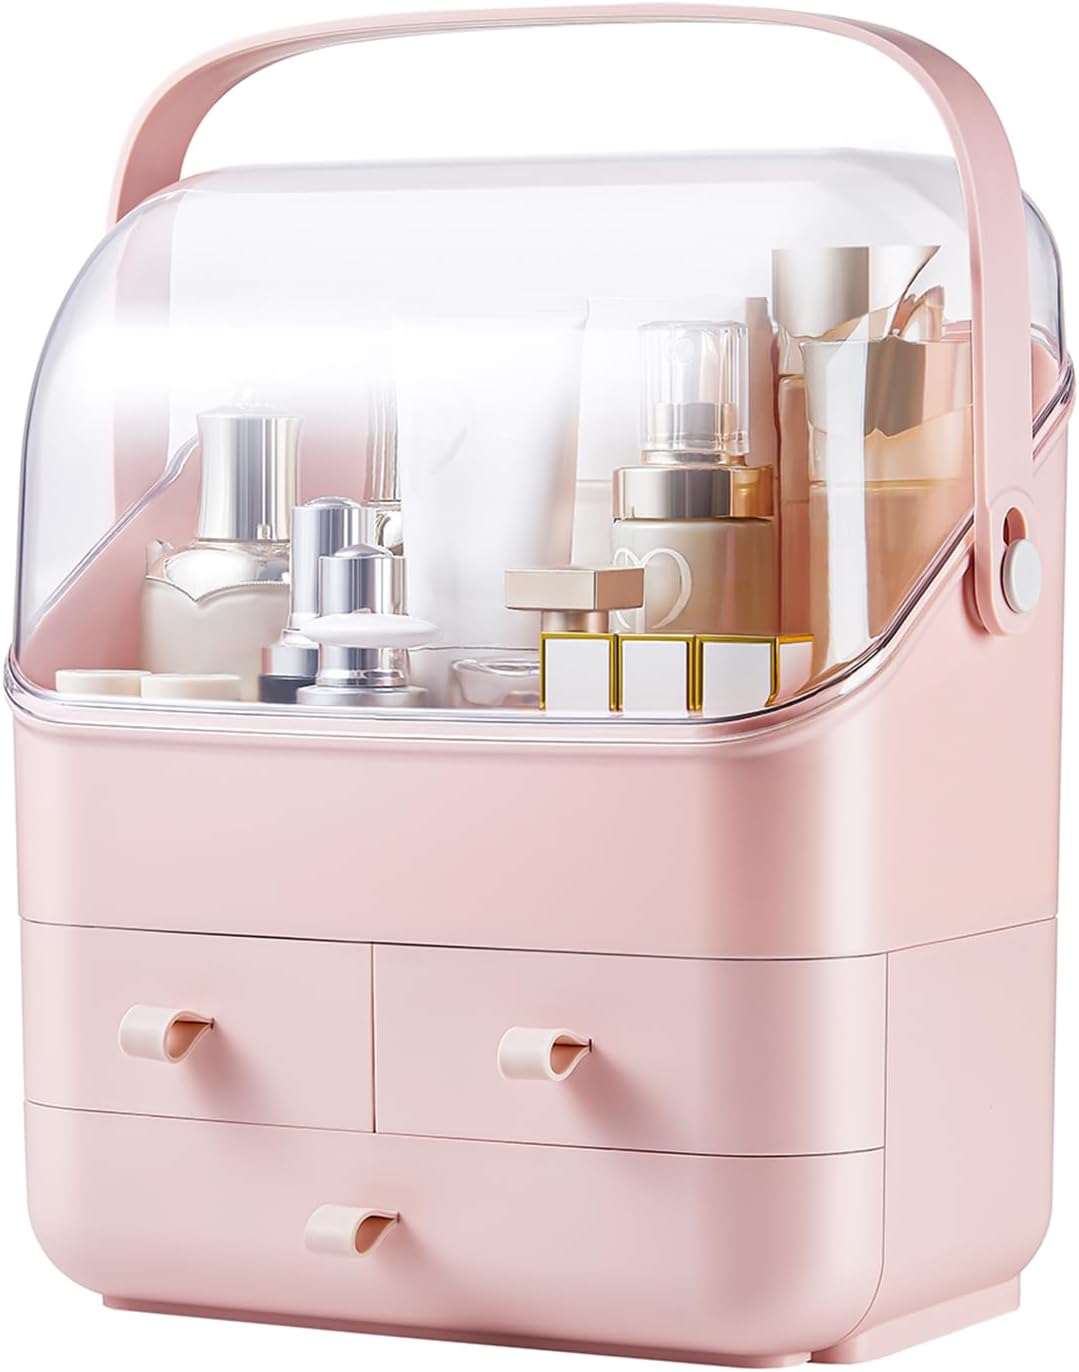 SUNFICON Pink Makeup Organizer Holder Cosmetic Storage Box with Dust Free Cover Portable Handle,Fully Open Waterproof Lid, Dust Proof Drawers,Great for Bathroom Countertop Bedroom Dresser